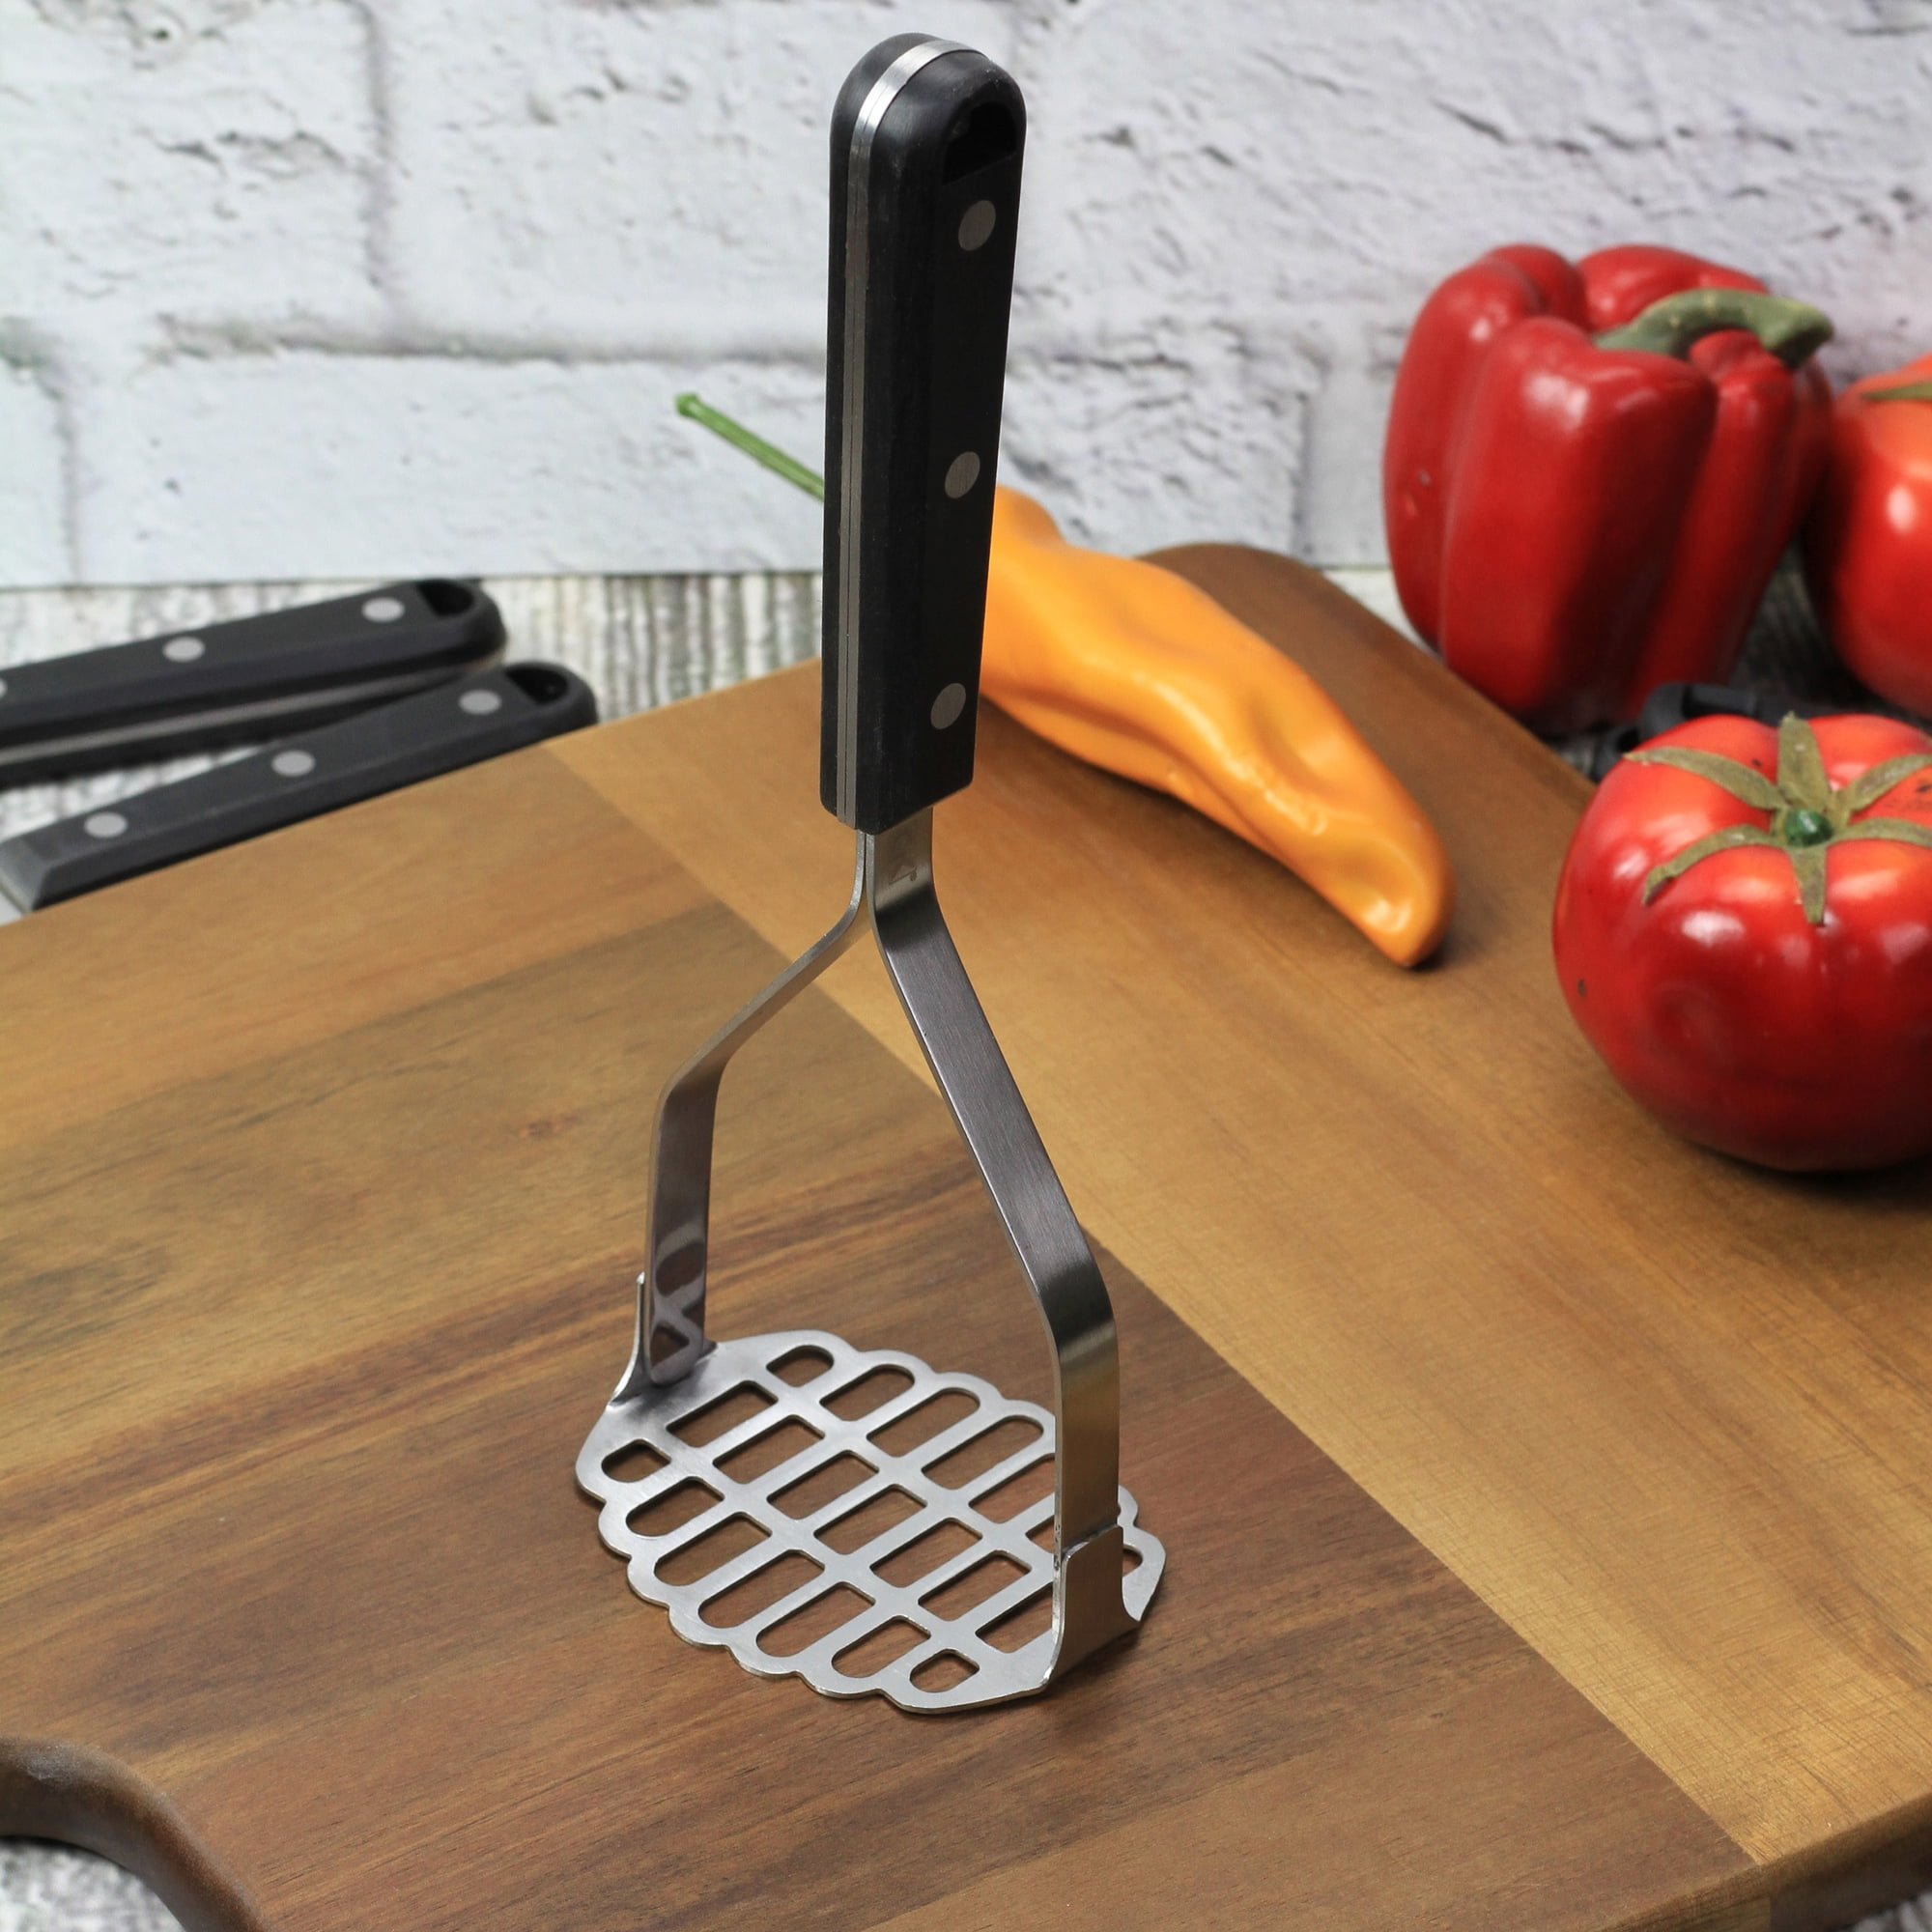 Potato Masher Stainless Steel Heavy Duty Strong Anti- Handle Not Easy to Bent Easy to Use Sturdy Construction, Silver